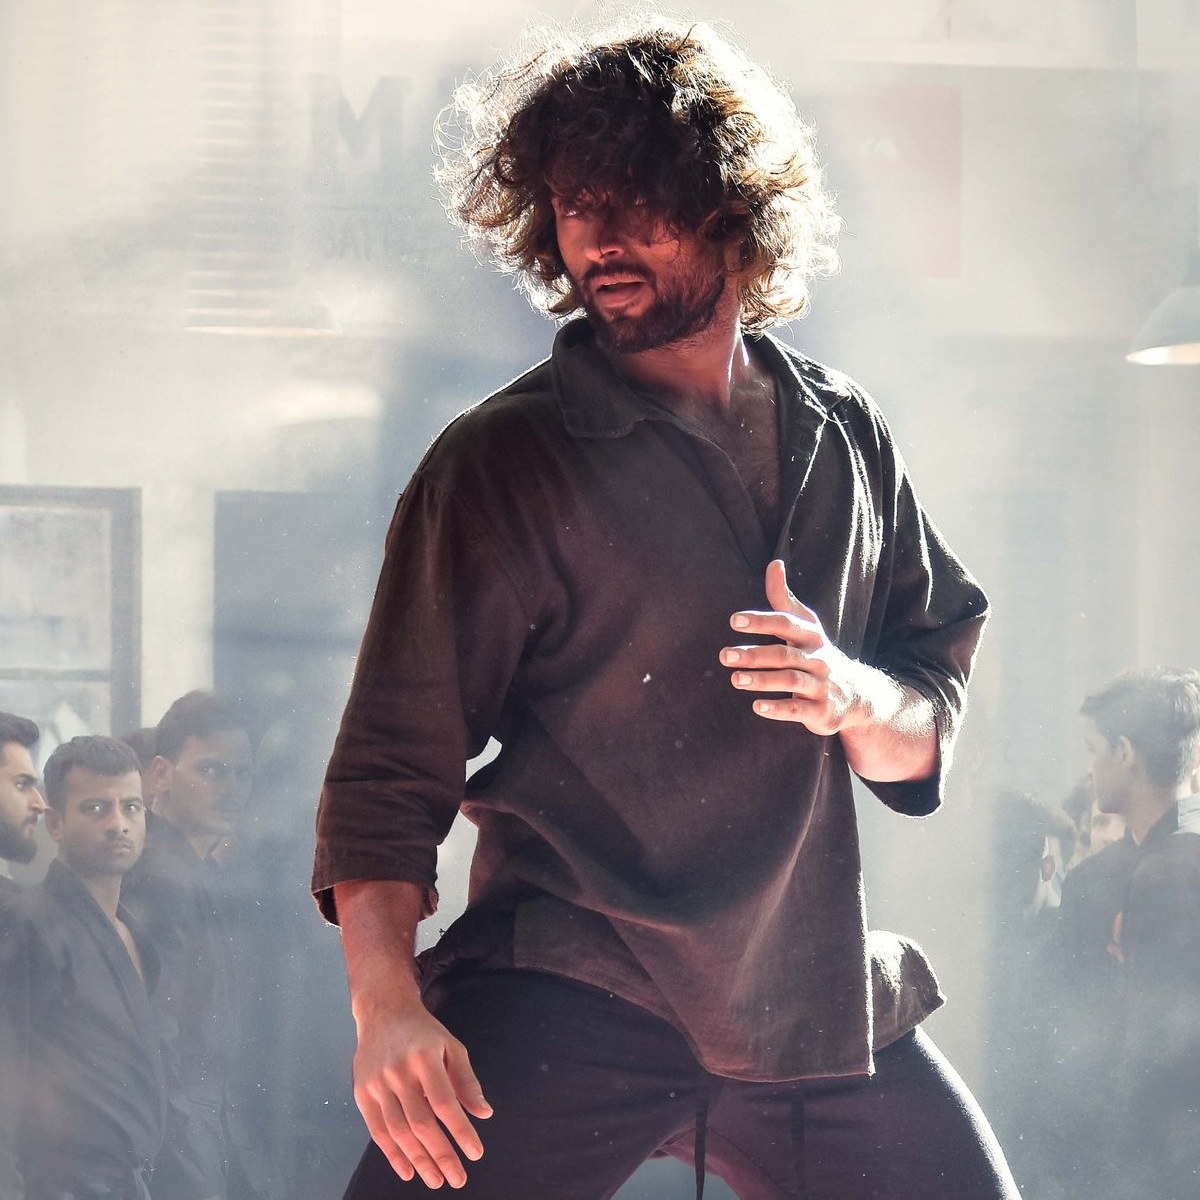 Liger box office collections; Vijay Deverakonda starrer has a DISASTER opening weekend at the box office